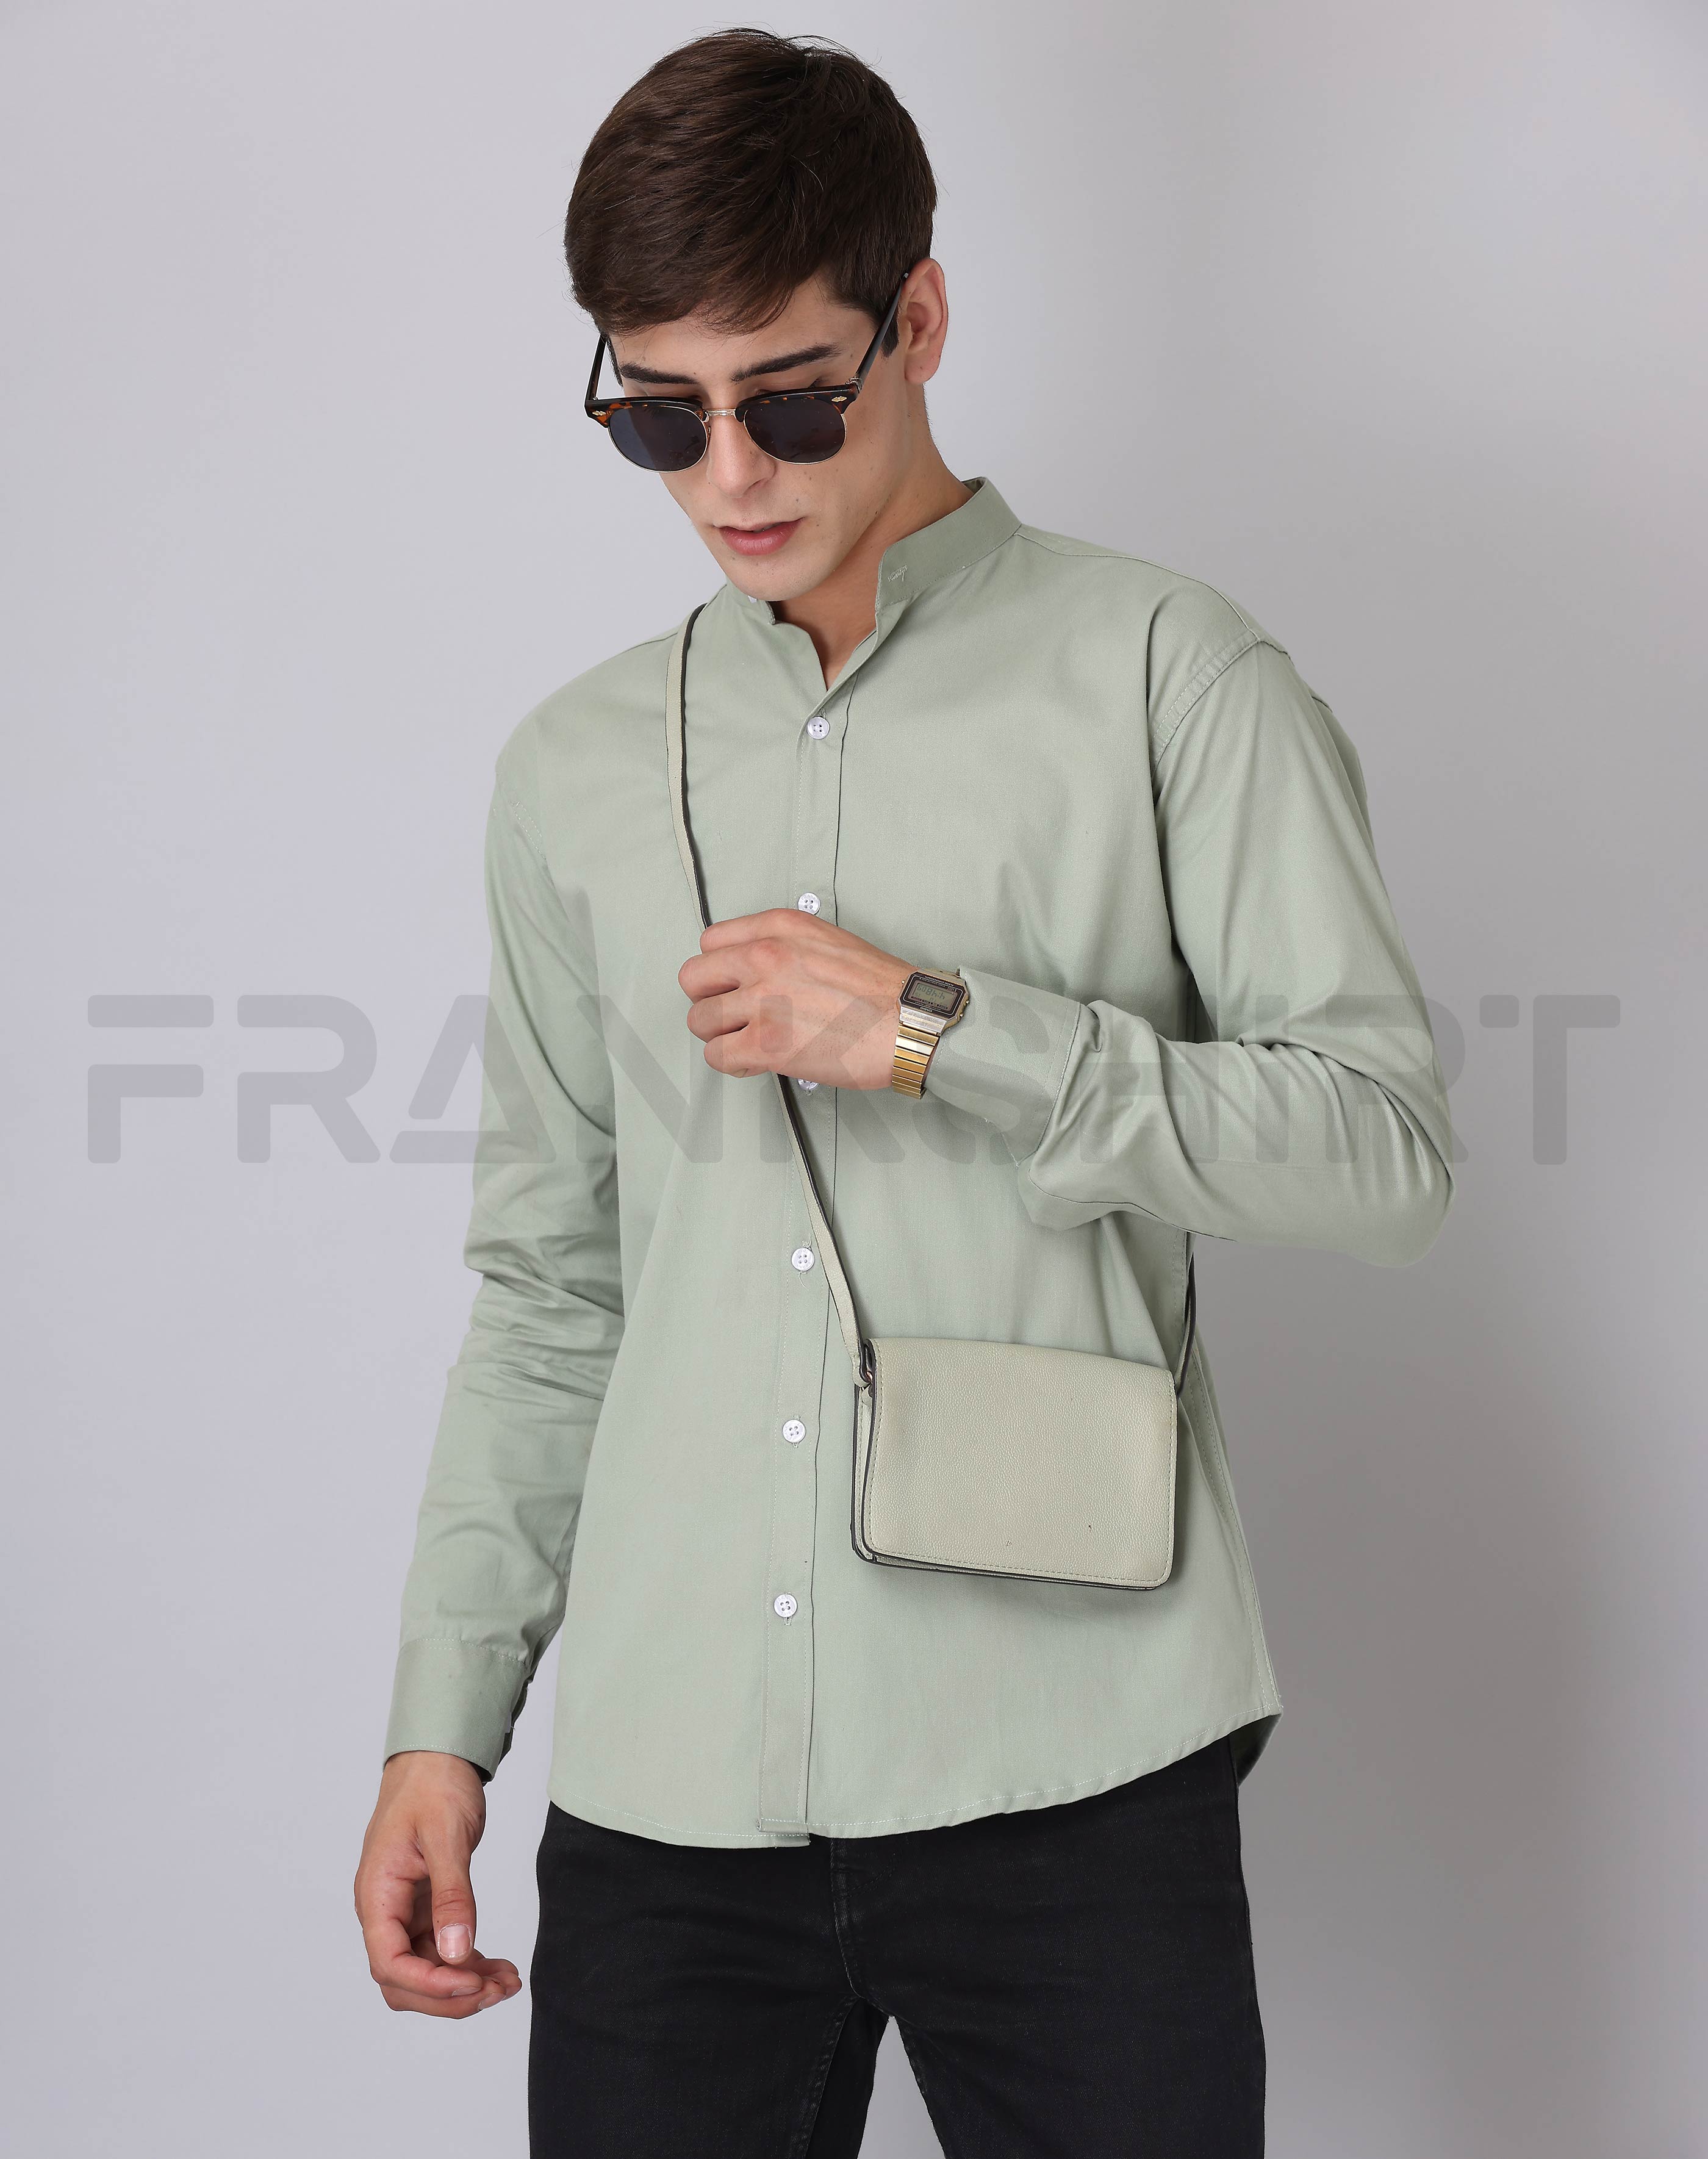 Frankshirt Chinese Collar Pista Tailored Fit Cotton Casual Shirt for Man